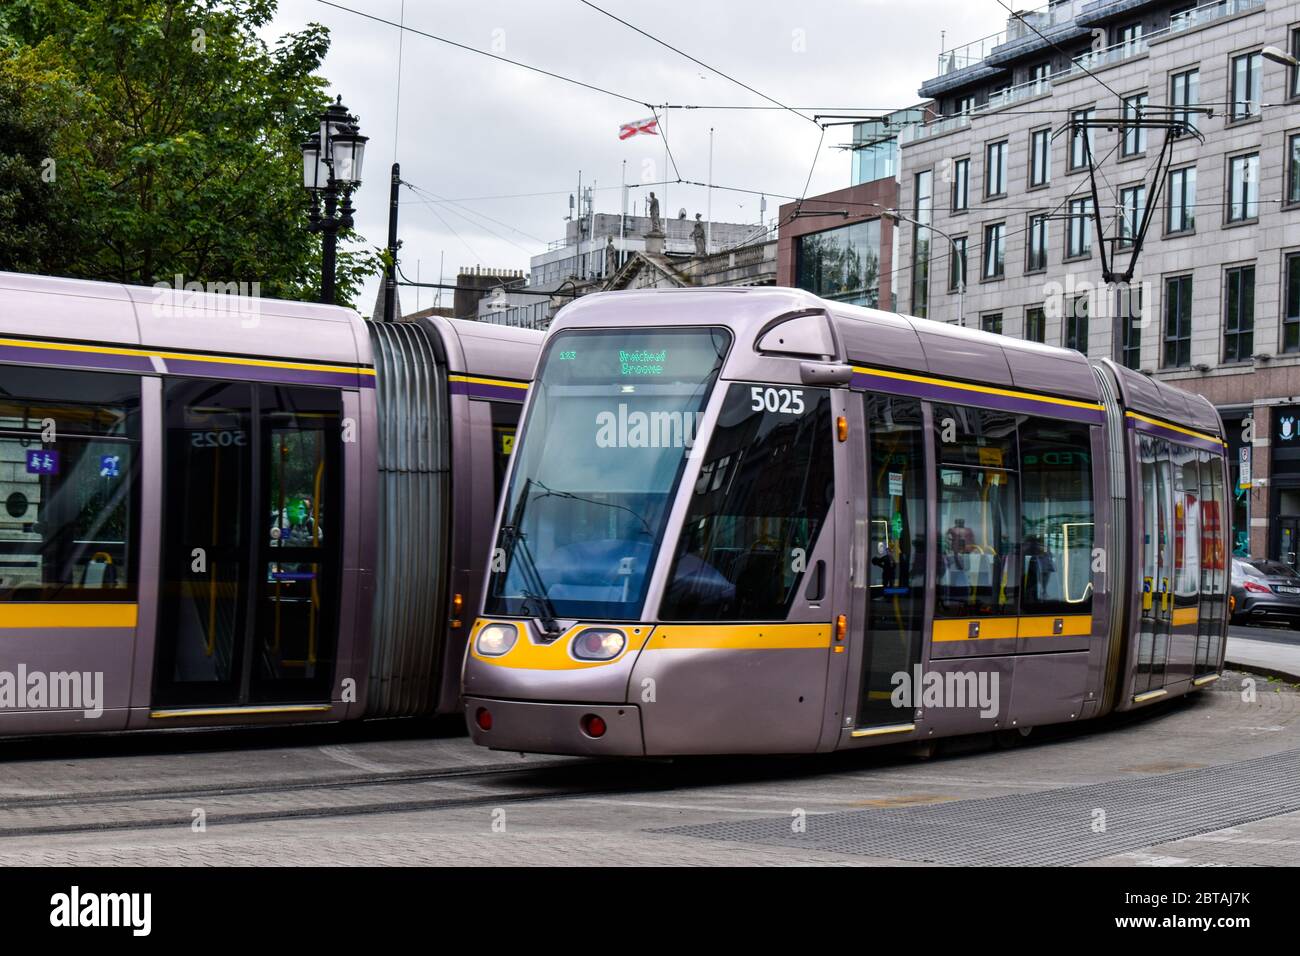 DUBLIN, IRELAND - 23 May 2020: Luas trams passing by at st stephens green in Dublin city centre Stock Photo